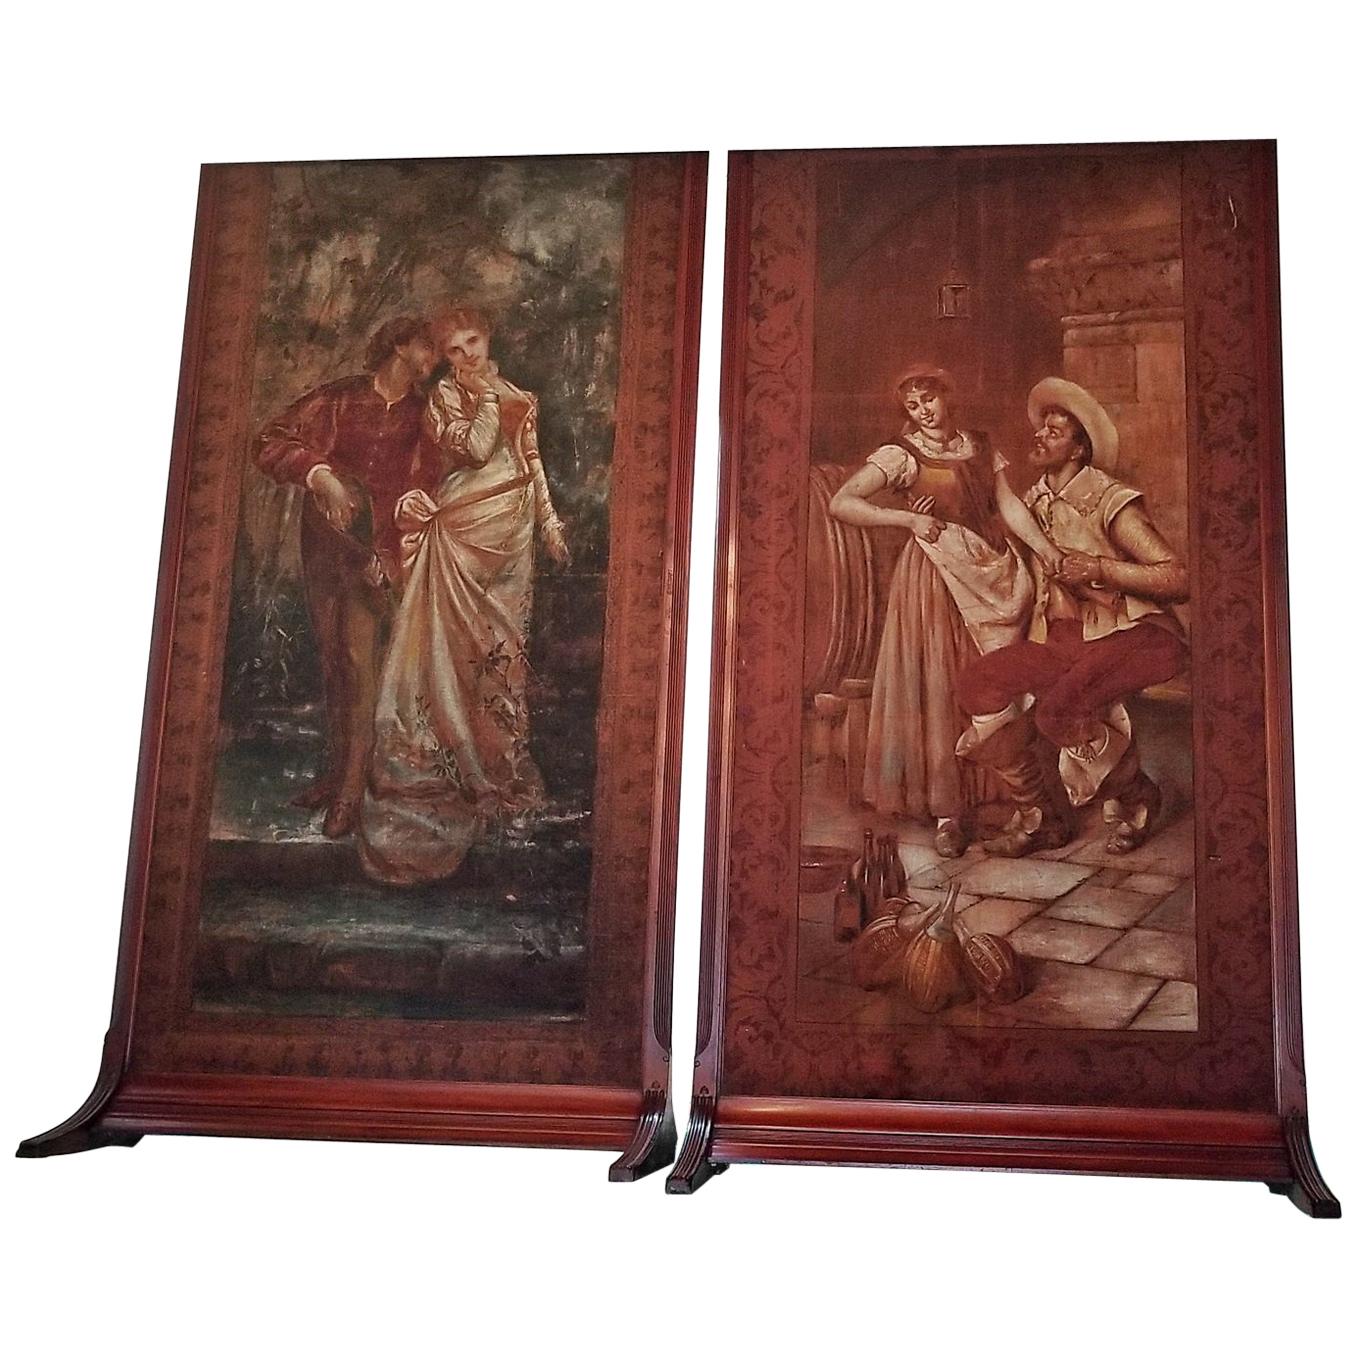 Pair of Monumental Framed Italian 18th Century Painted Tapestries